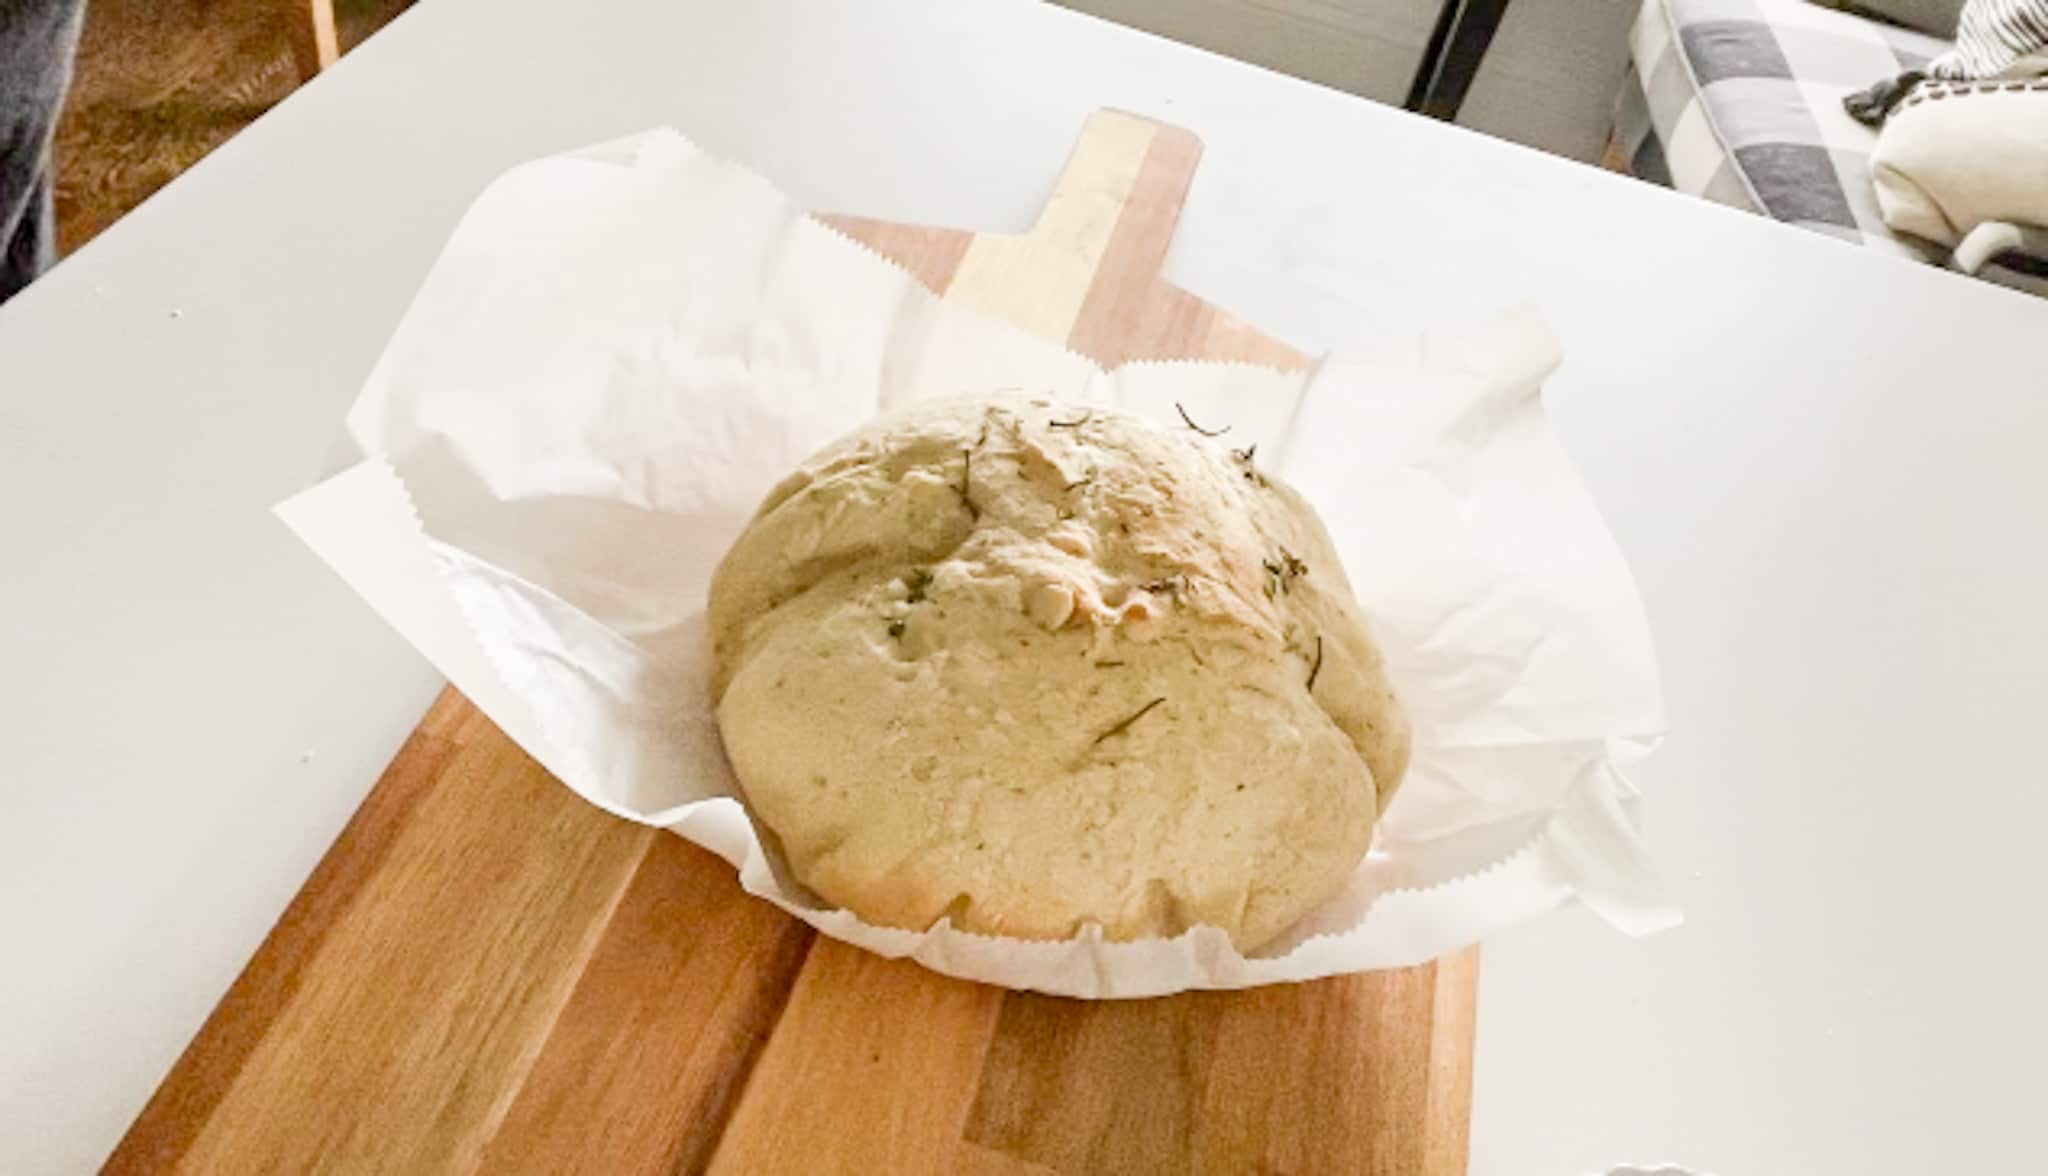 Instant Pot No-Knead Herb Bread. Save time by using your Instant Pot to proof this soft and flavorful bread with a crunchy crust. You'll never want to buy supermarket bread again! 